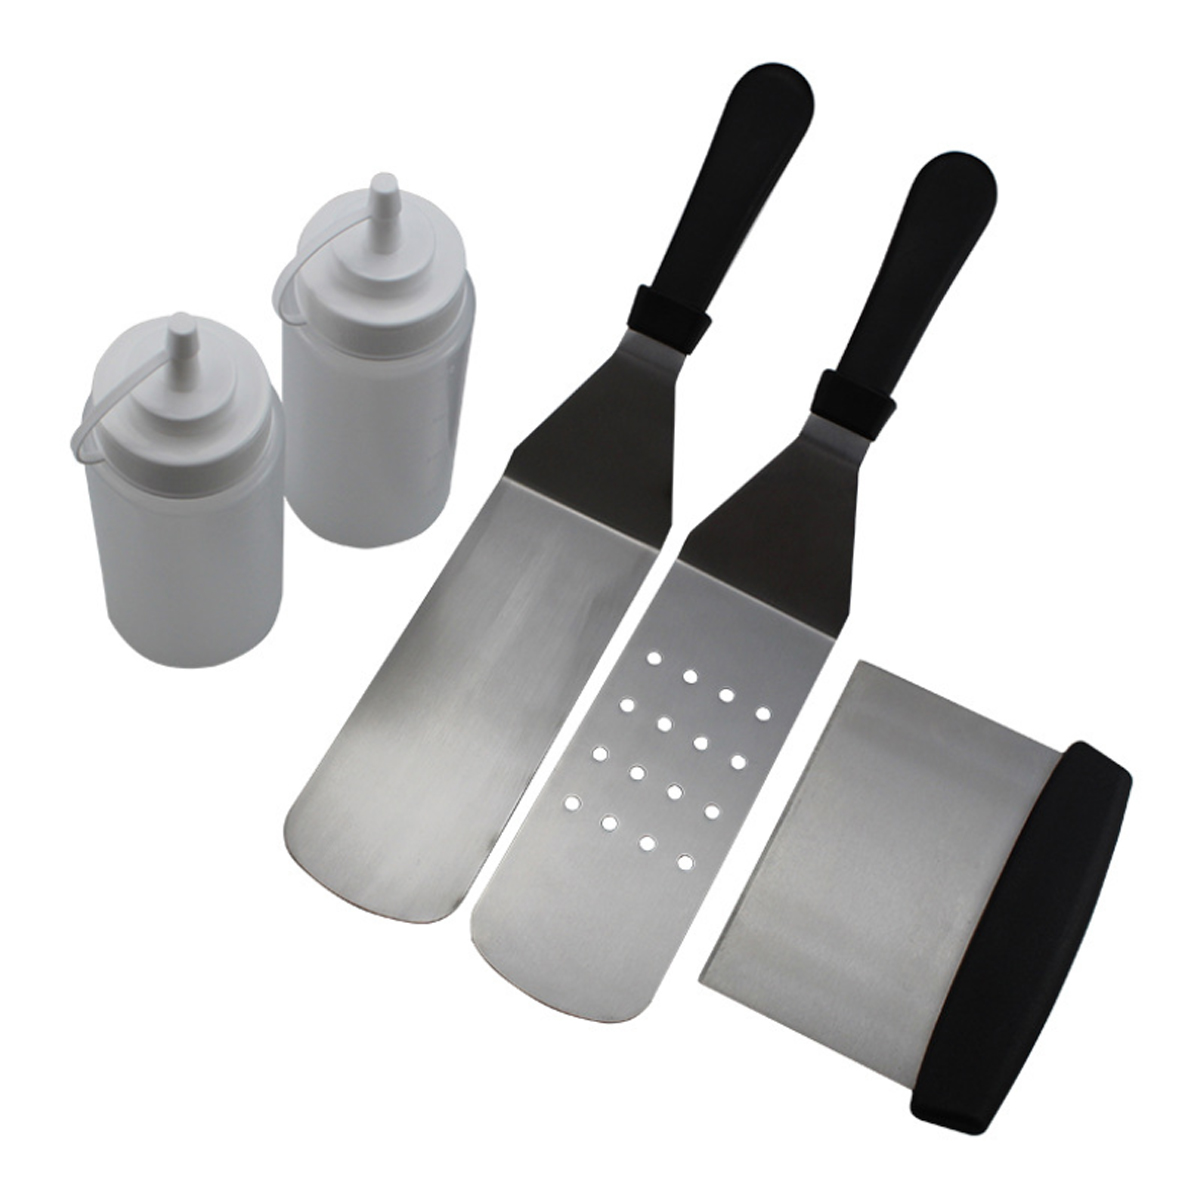 5Pcs-Stainless-Steel-Griddle-Cooking-Tools-Kit-for-Grill-Salad-Scraper-Chopper-Pizza-BBQ-Baking-Kitc-1623909-2